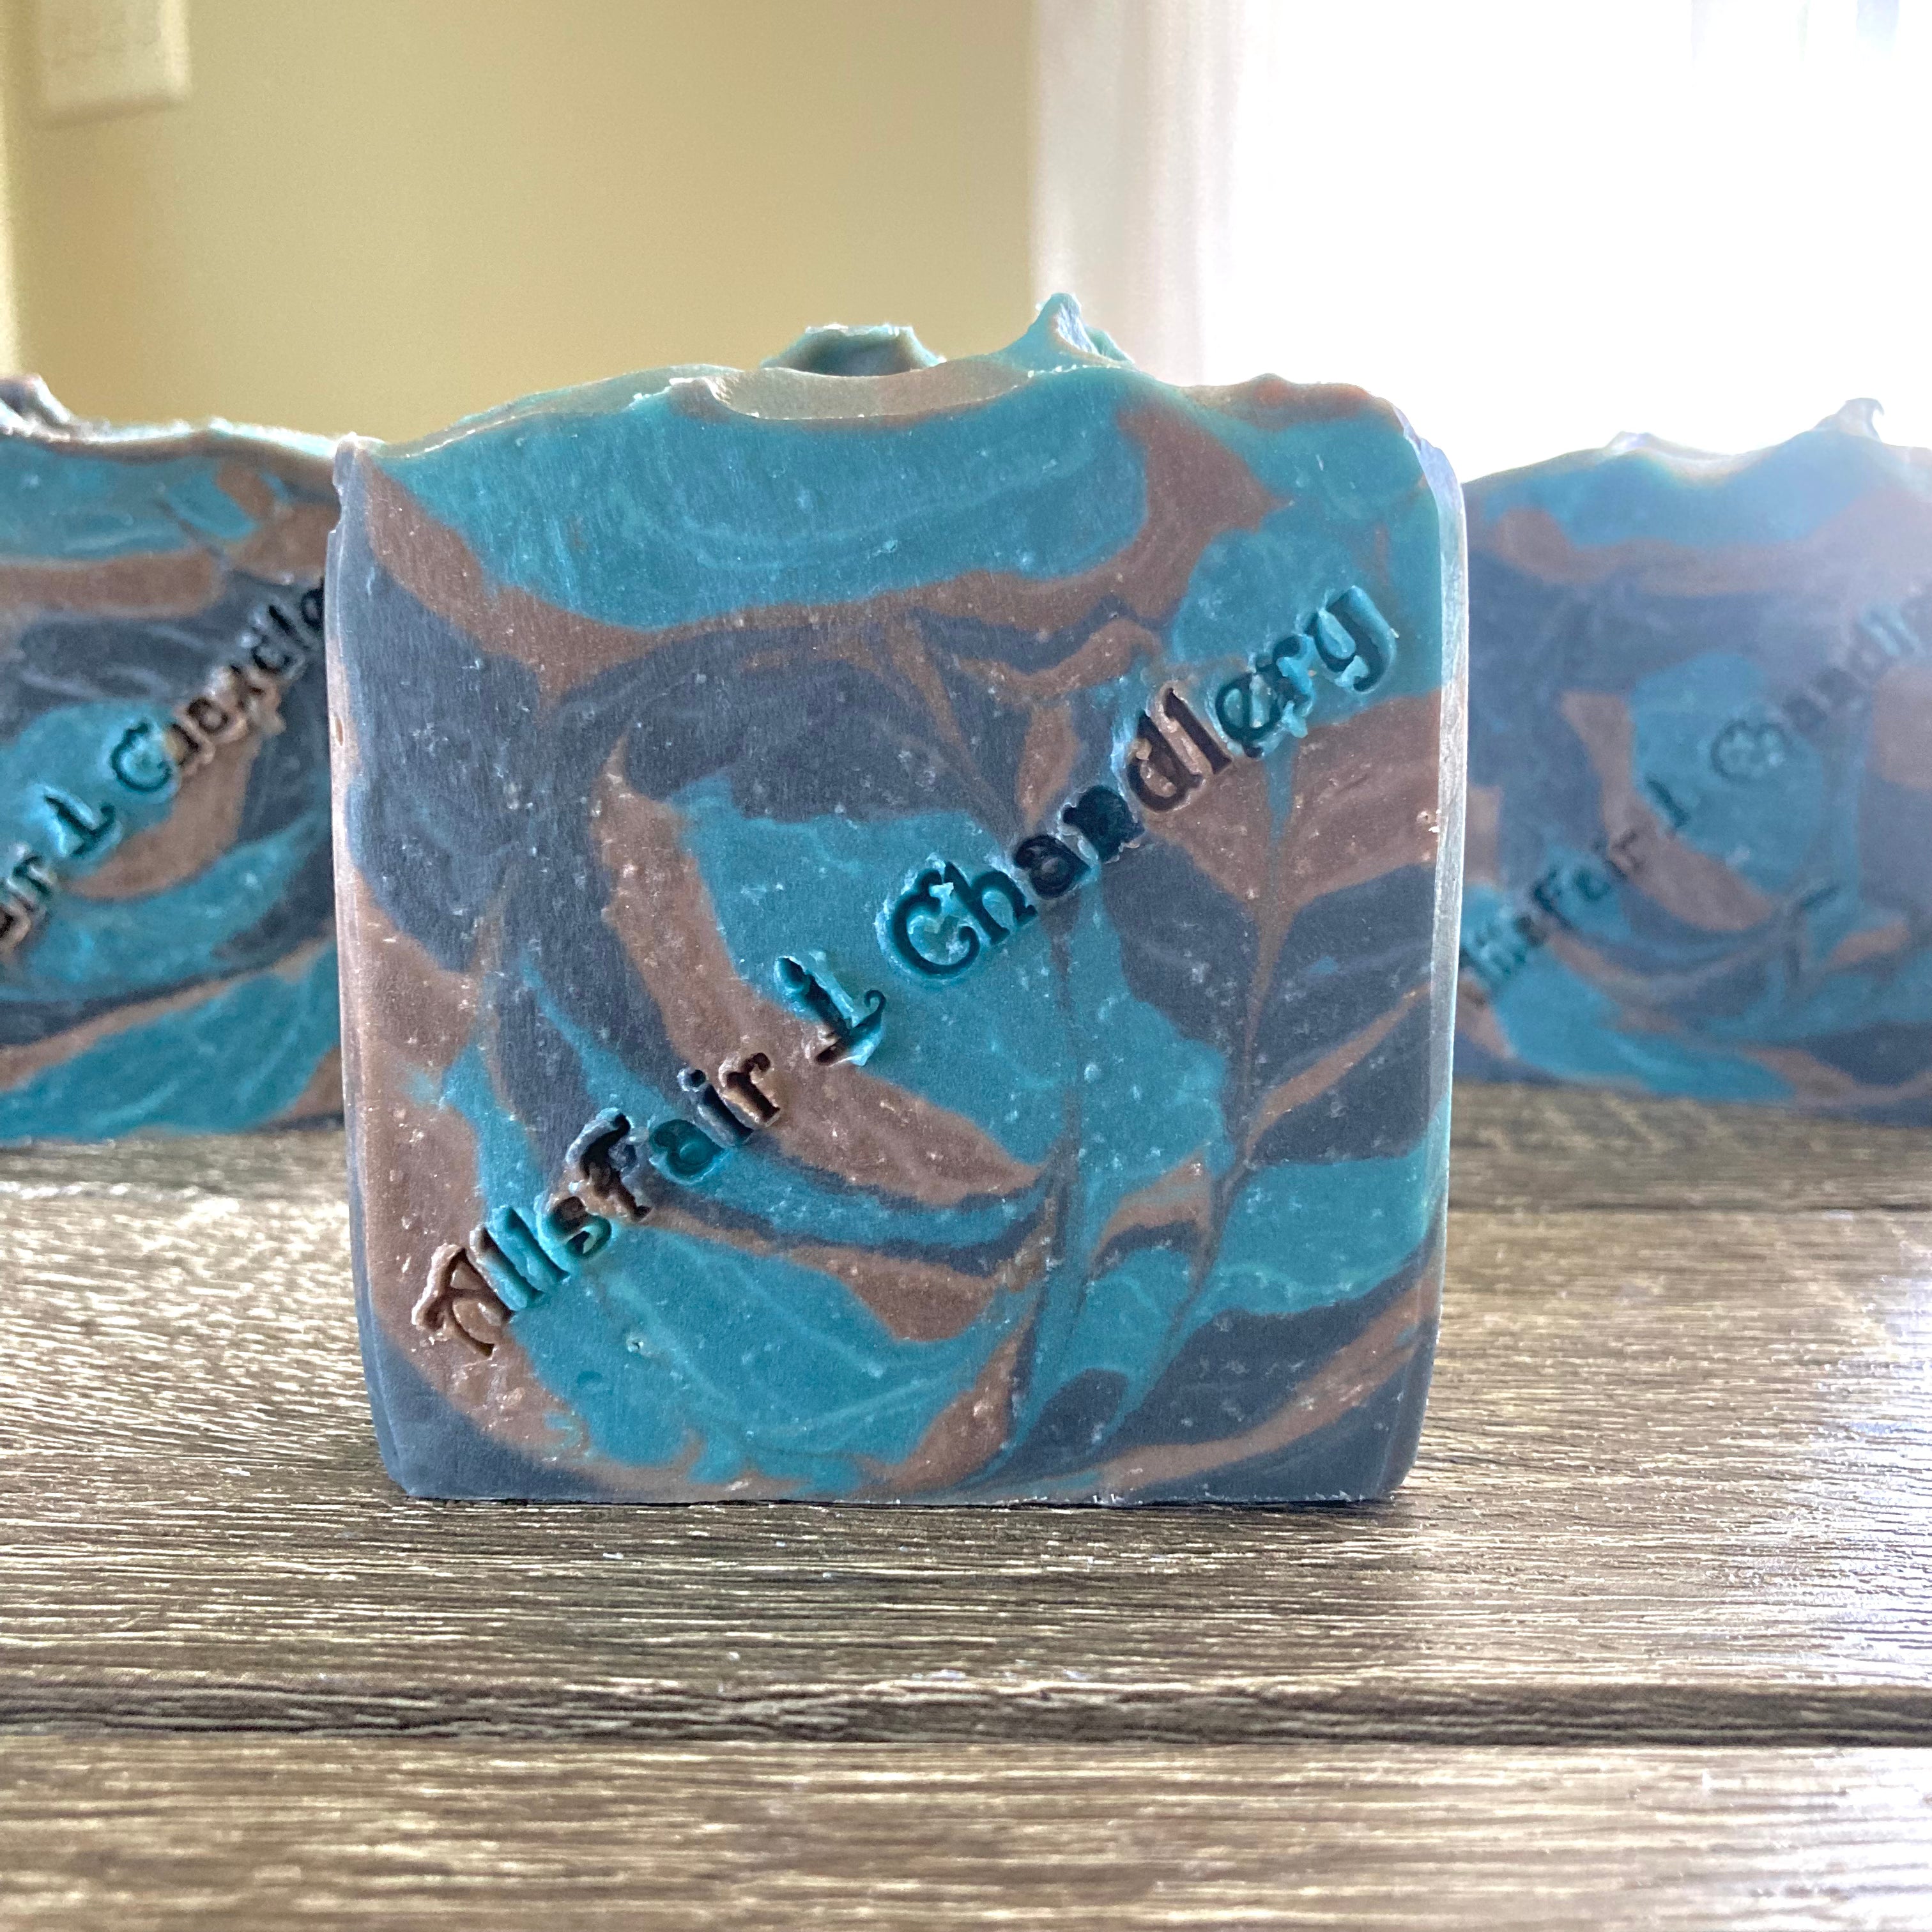 Strong and Bold Soap Bar 5 ounce